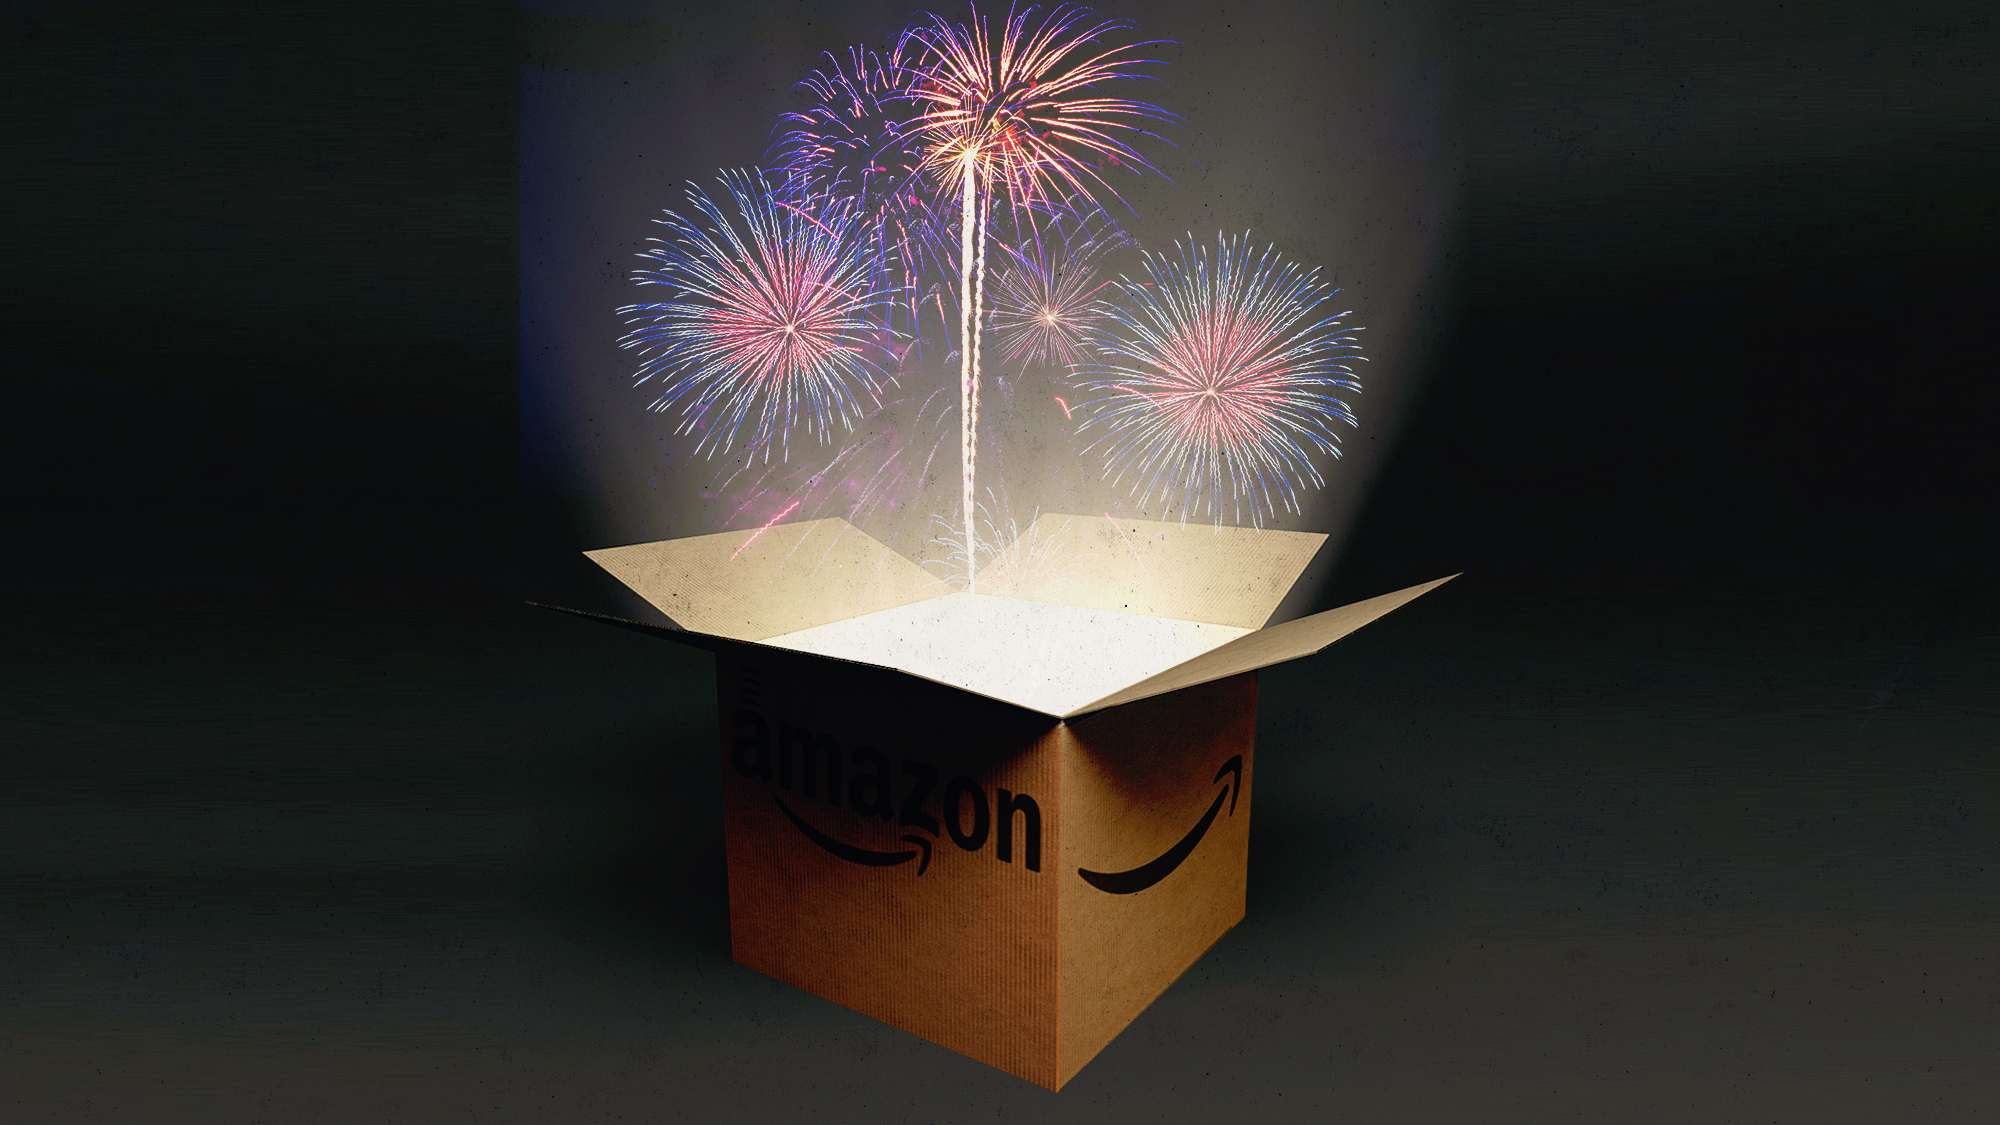 Photo-illustration of an Amazon box, open, with fireworks coming out of it